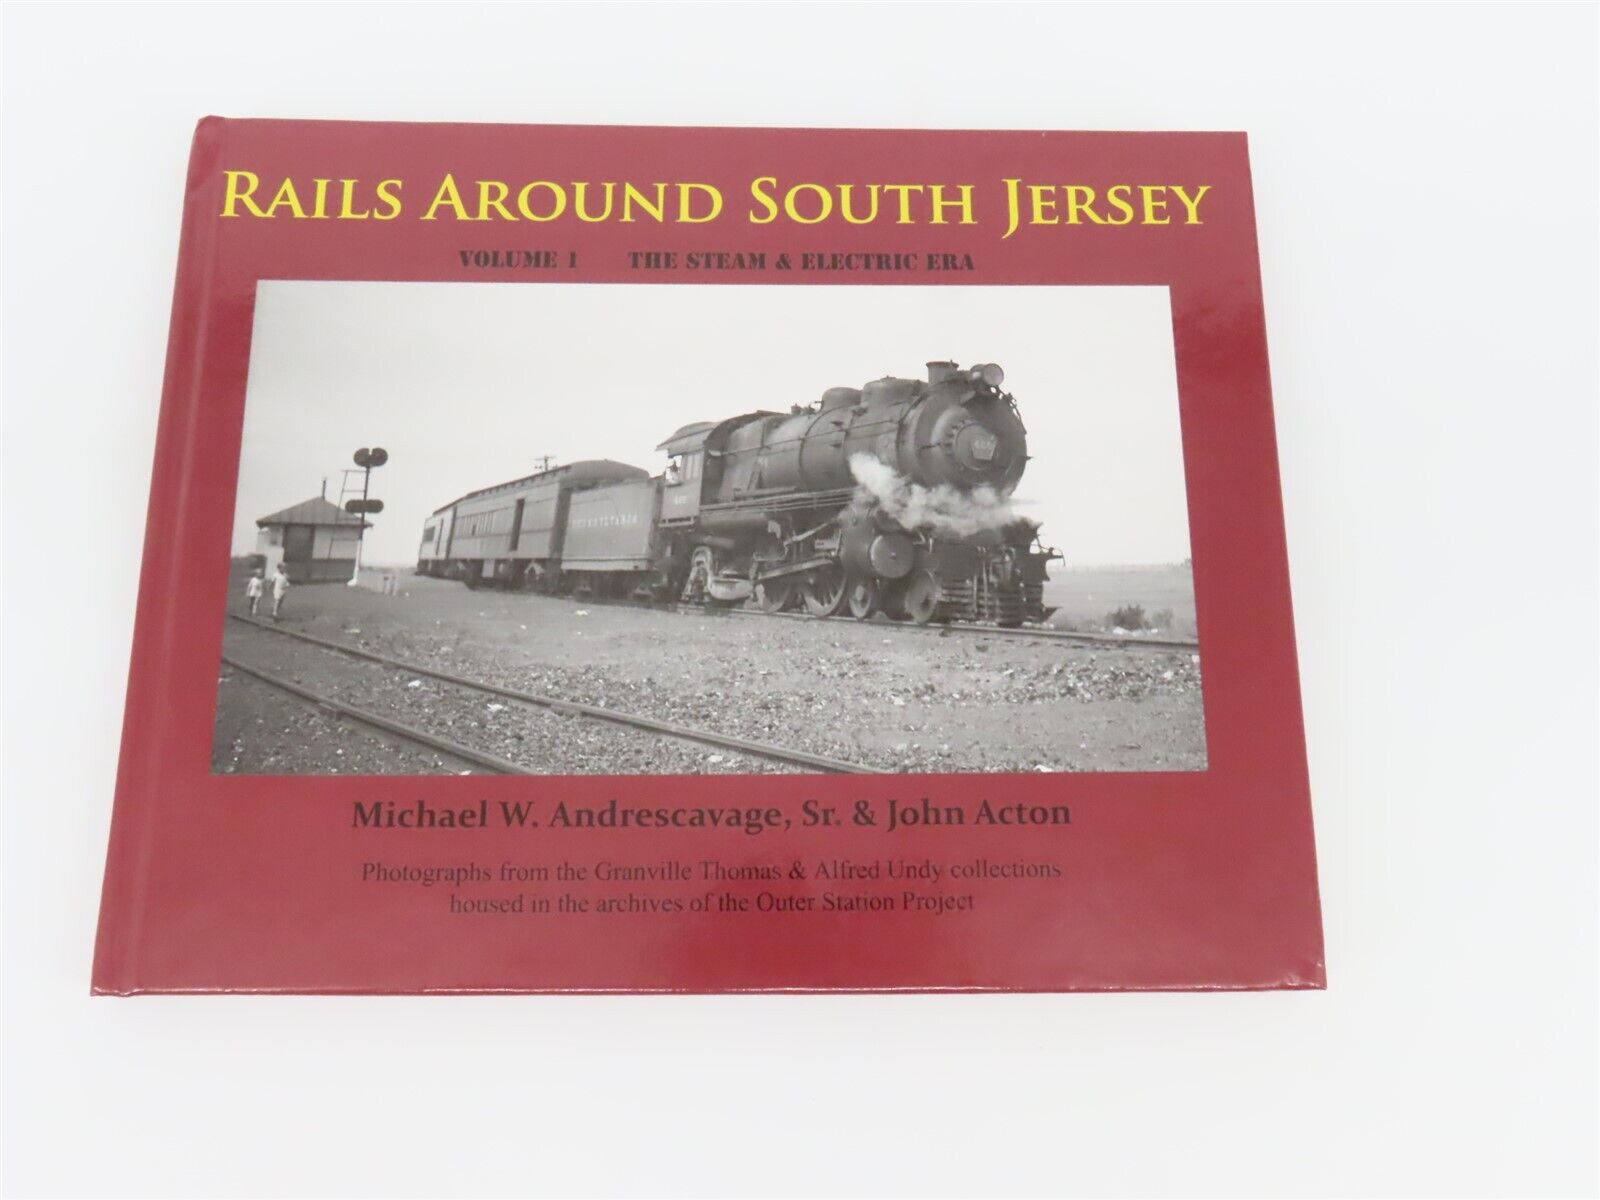 Rails Around South Jersey Volume 1 by Andrescavage & Acton ©2010 HC Book